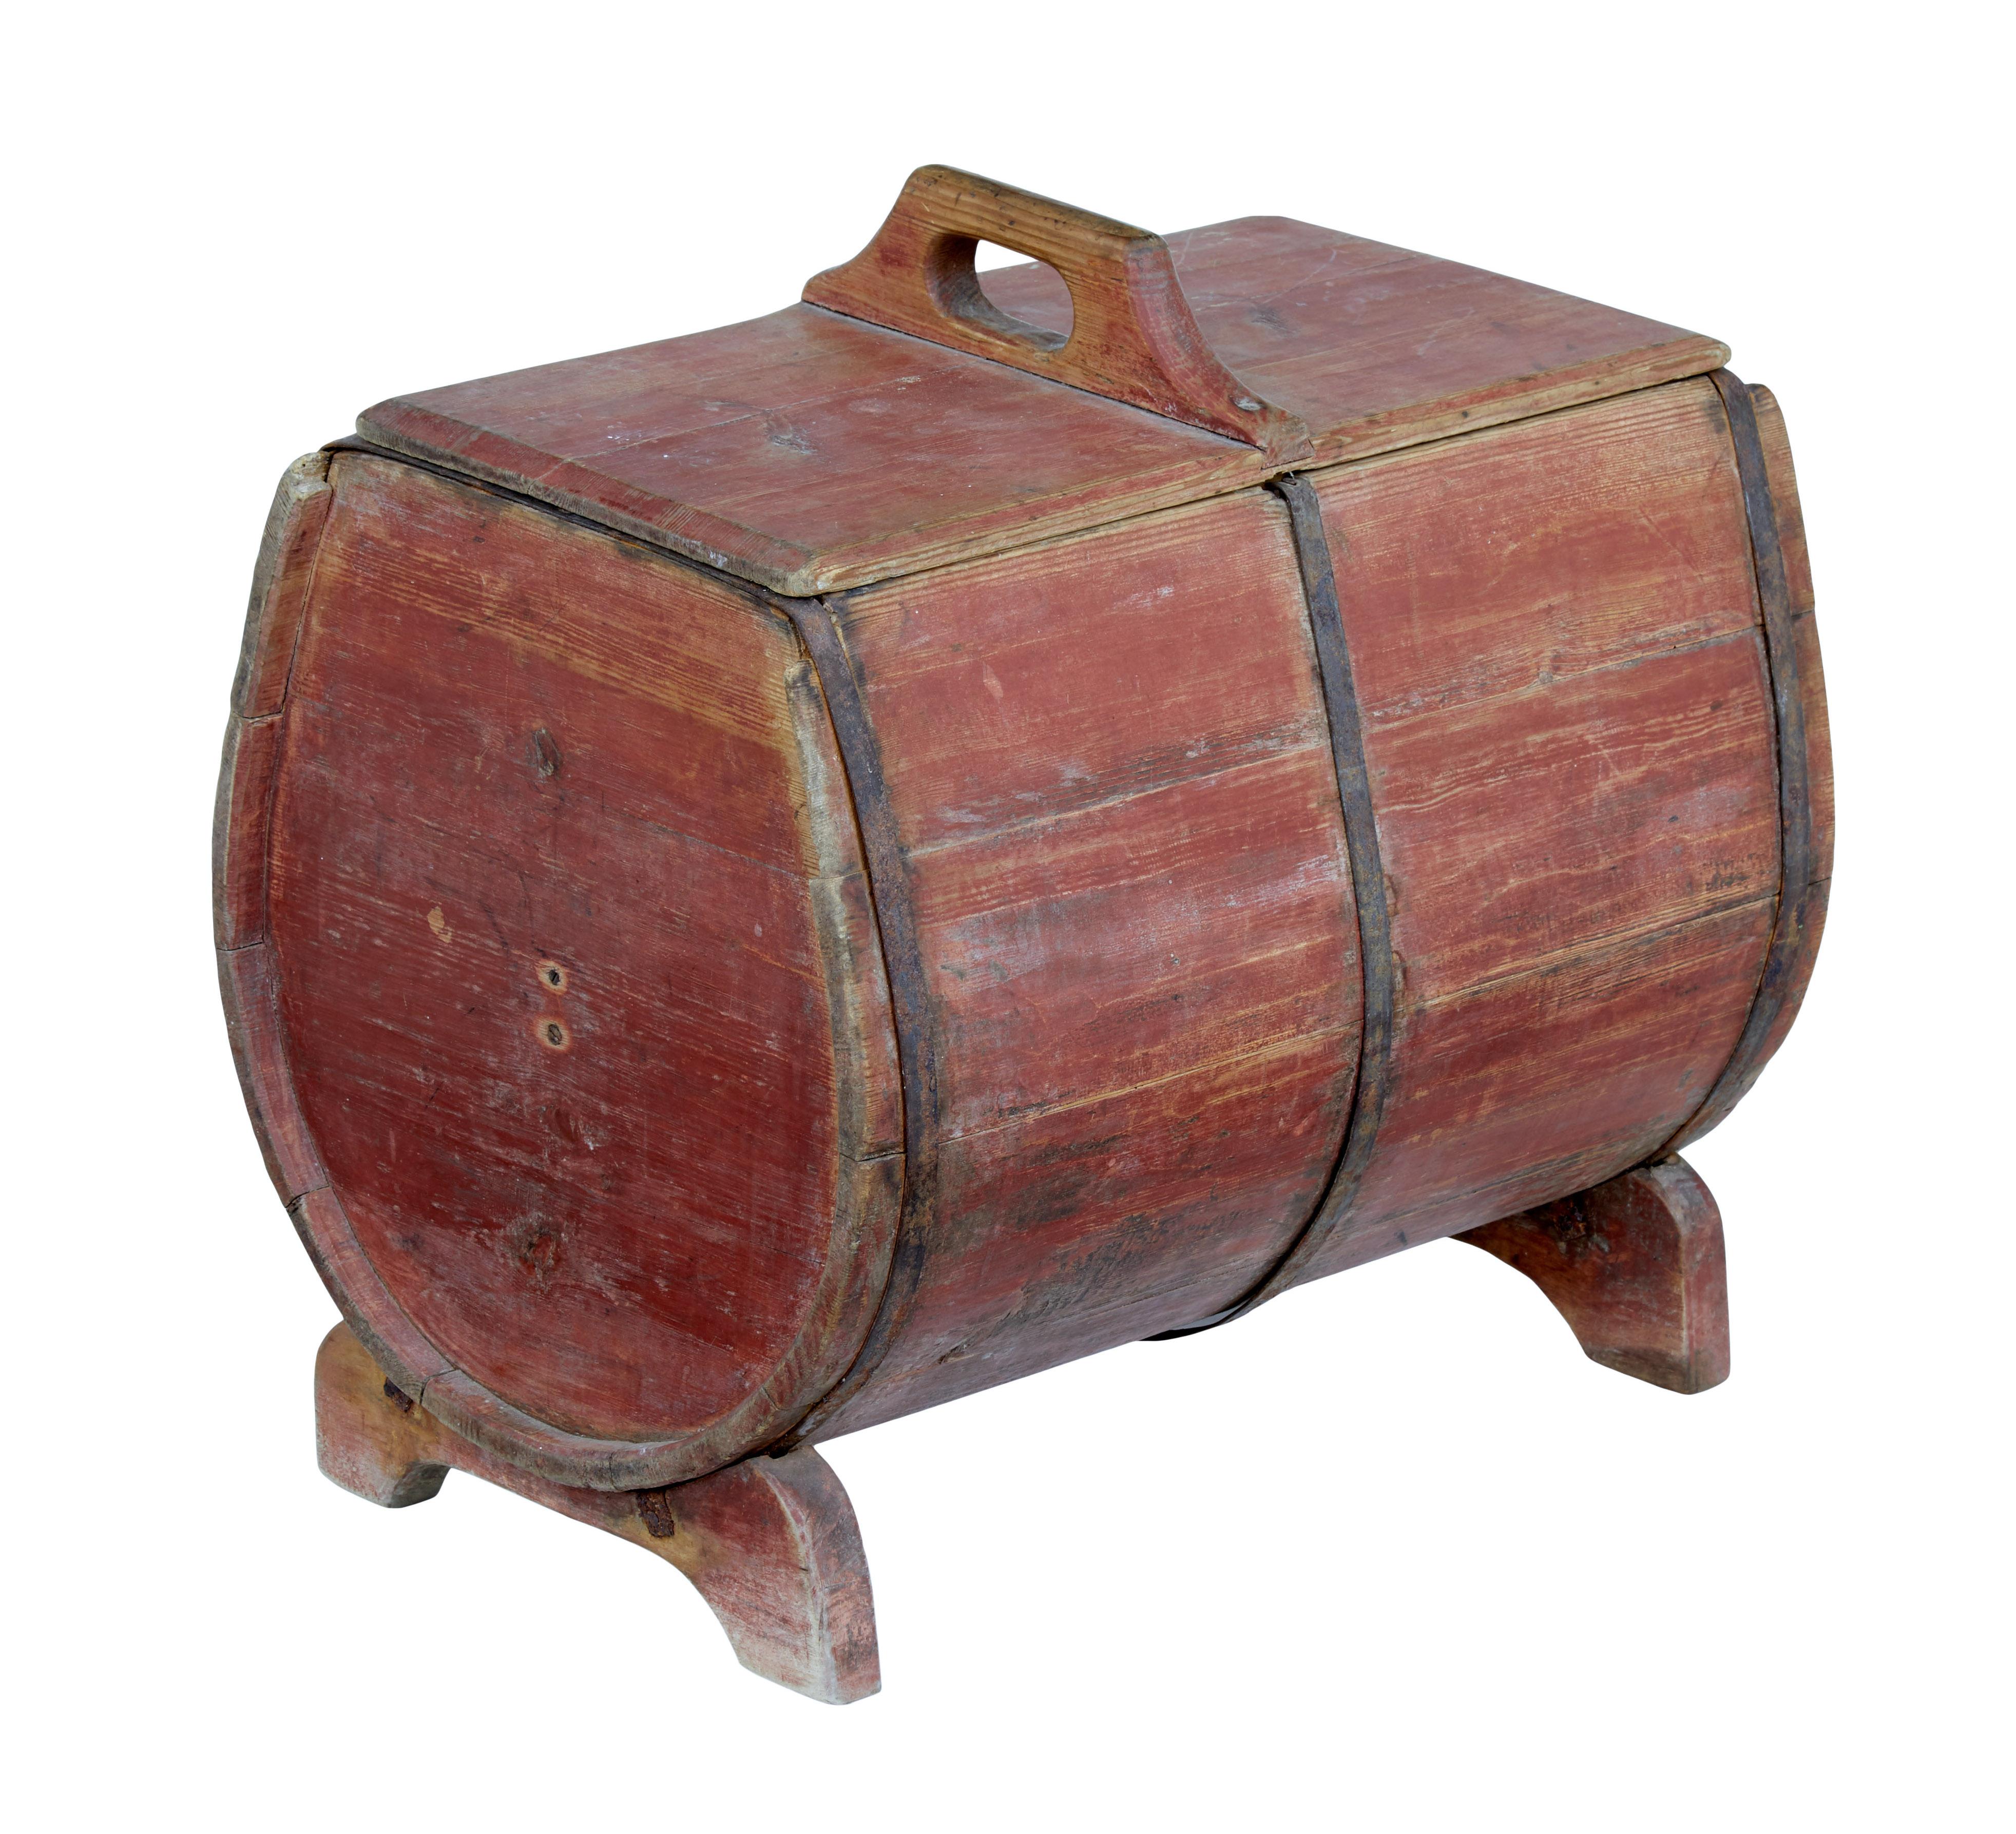 Beautiful original painted Swedish butter churn, circa 1860.

Unique piece of traditional Swedish woodware. Originally a butter churn which would of had a handle and paddle through the middle. Now presents itself for many possibilities for further